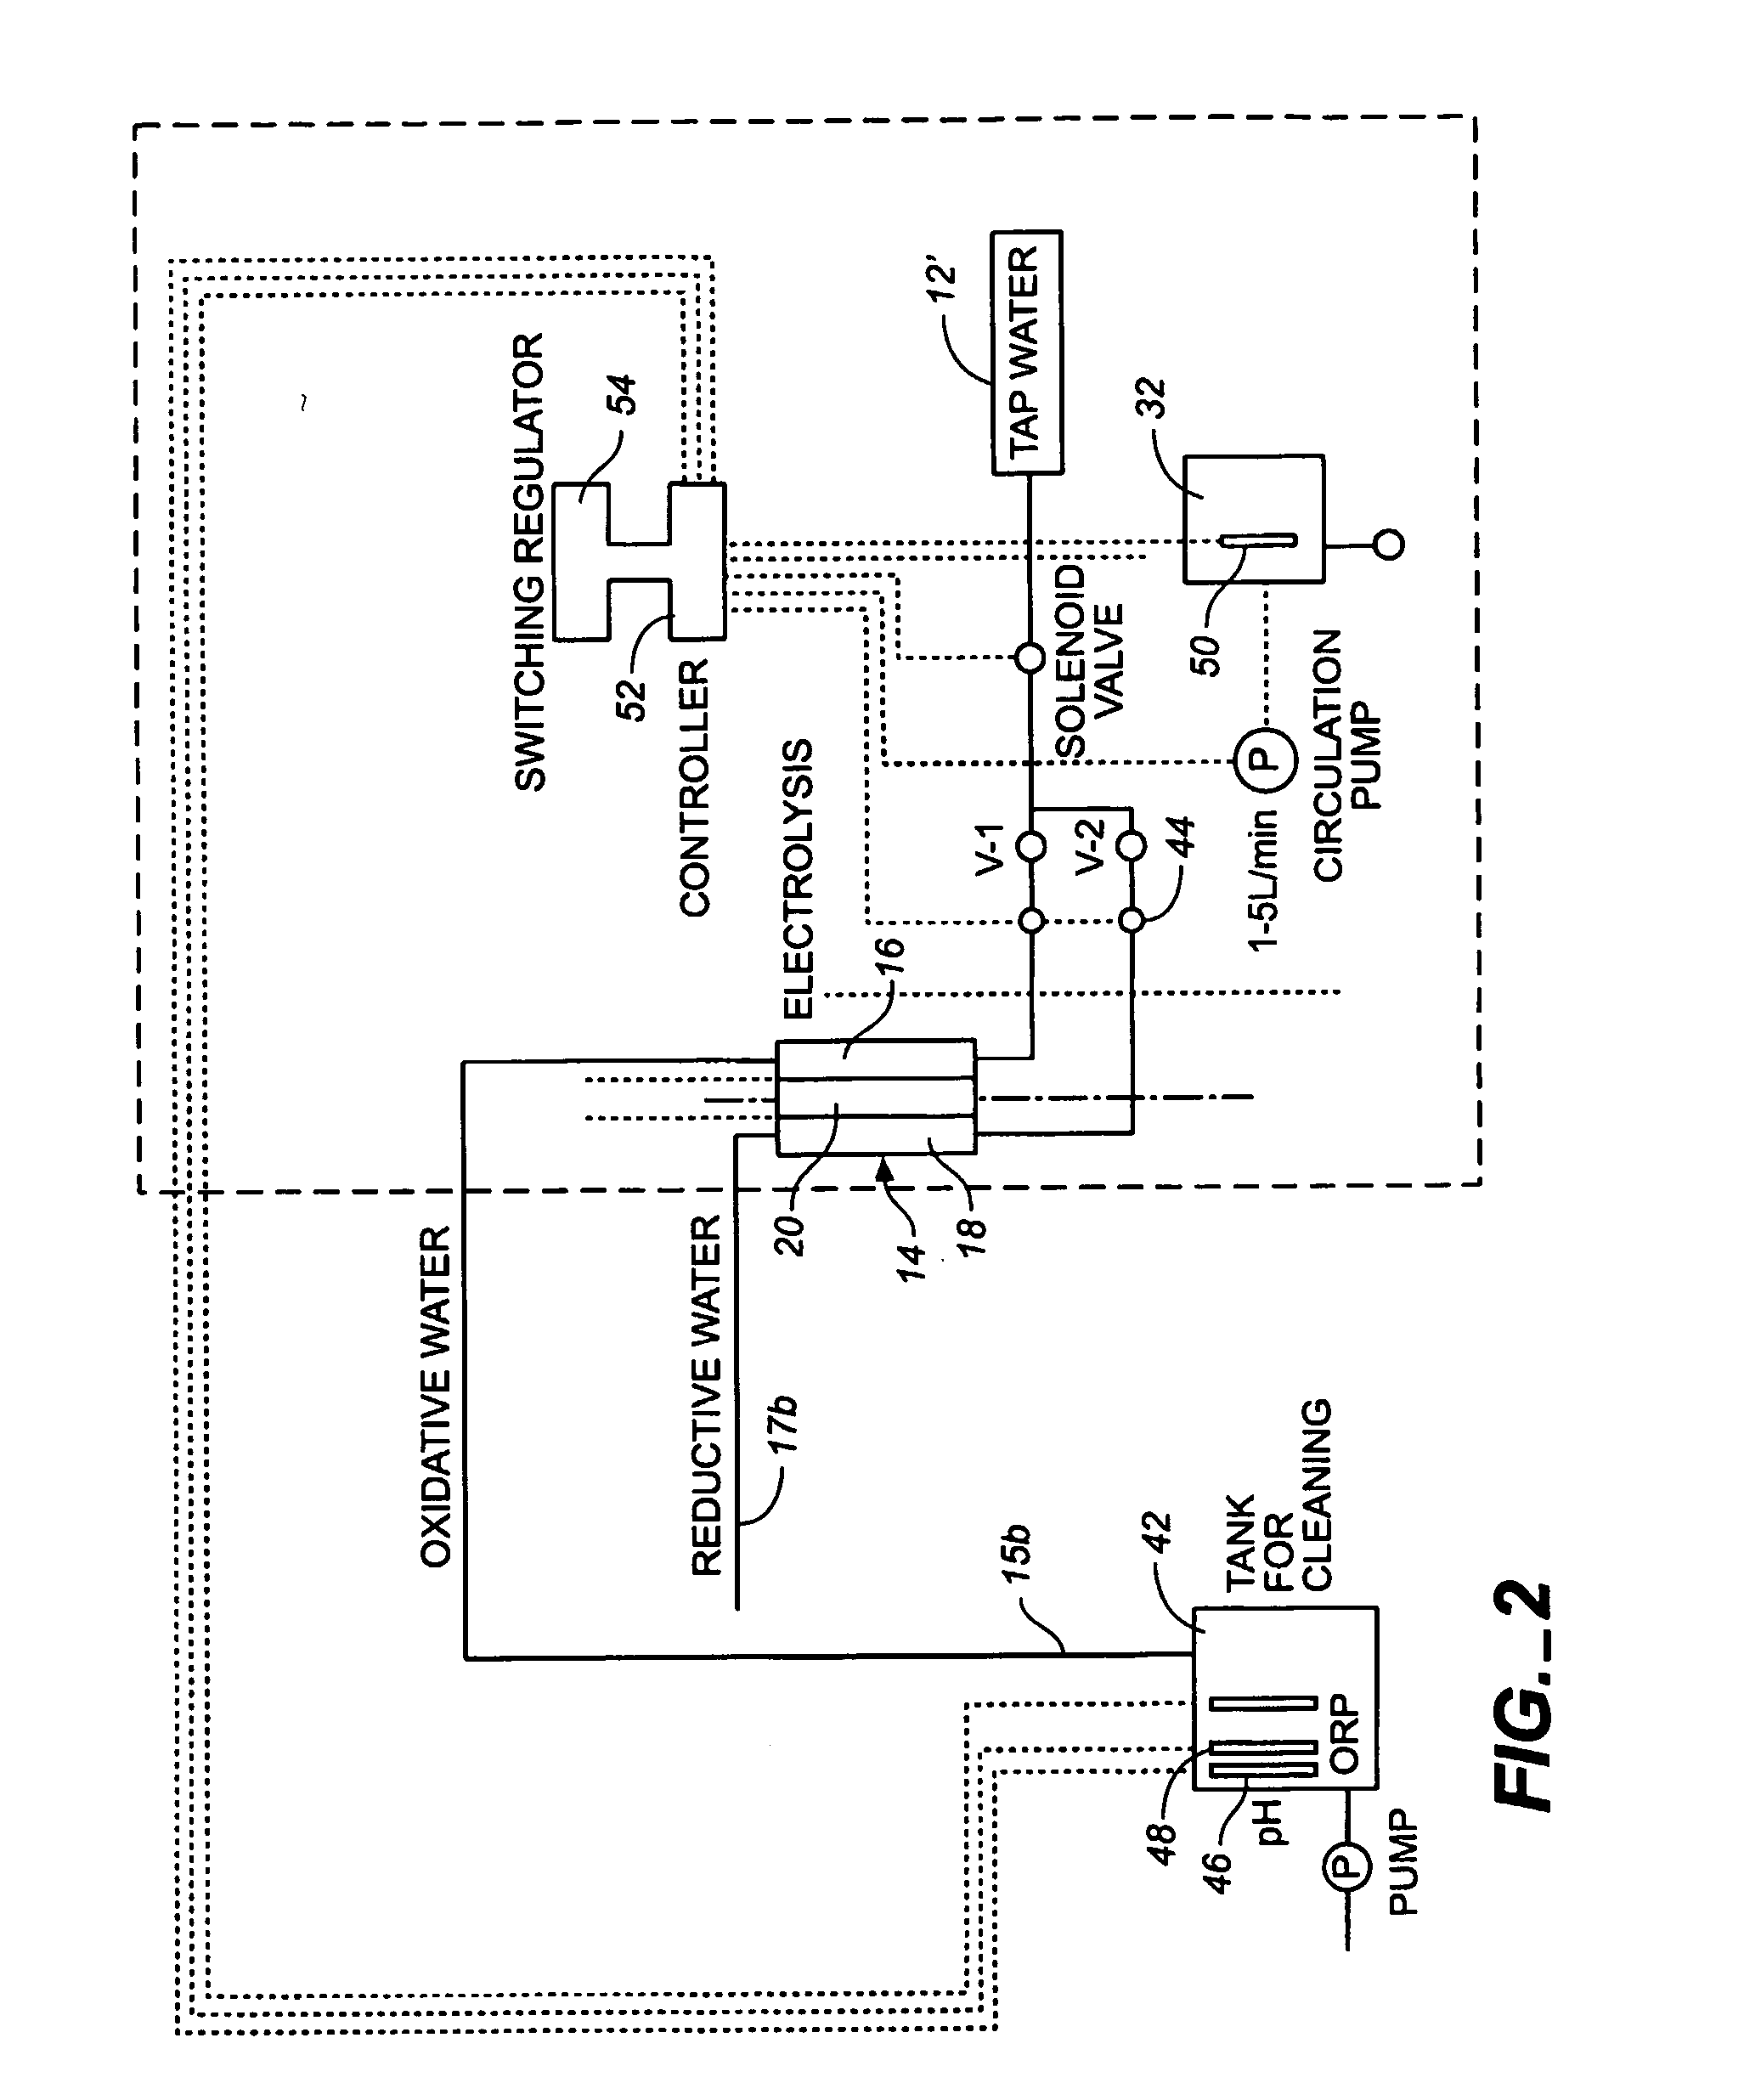 Method and apparatus for producting negative and positive oxidative reductive potential (orp) water